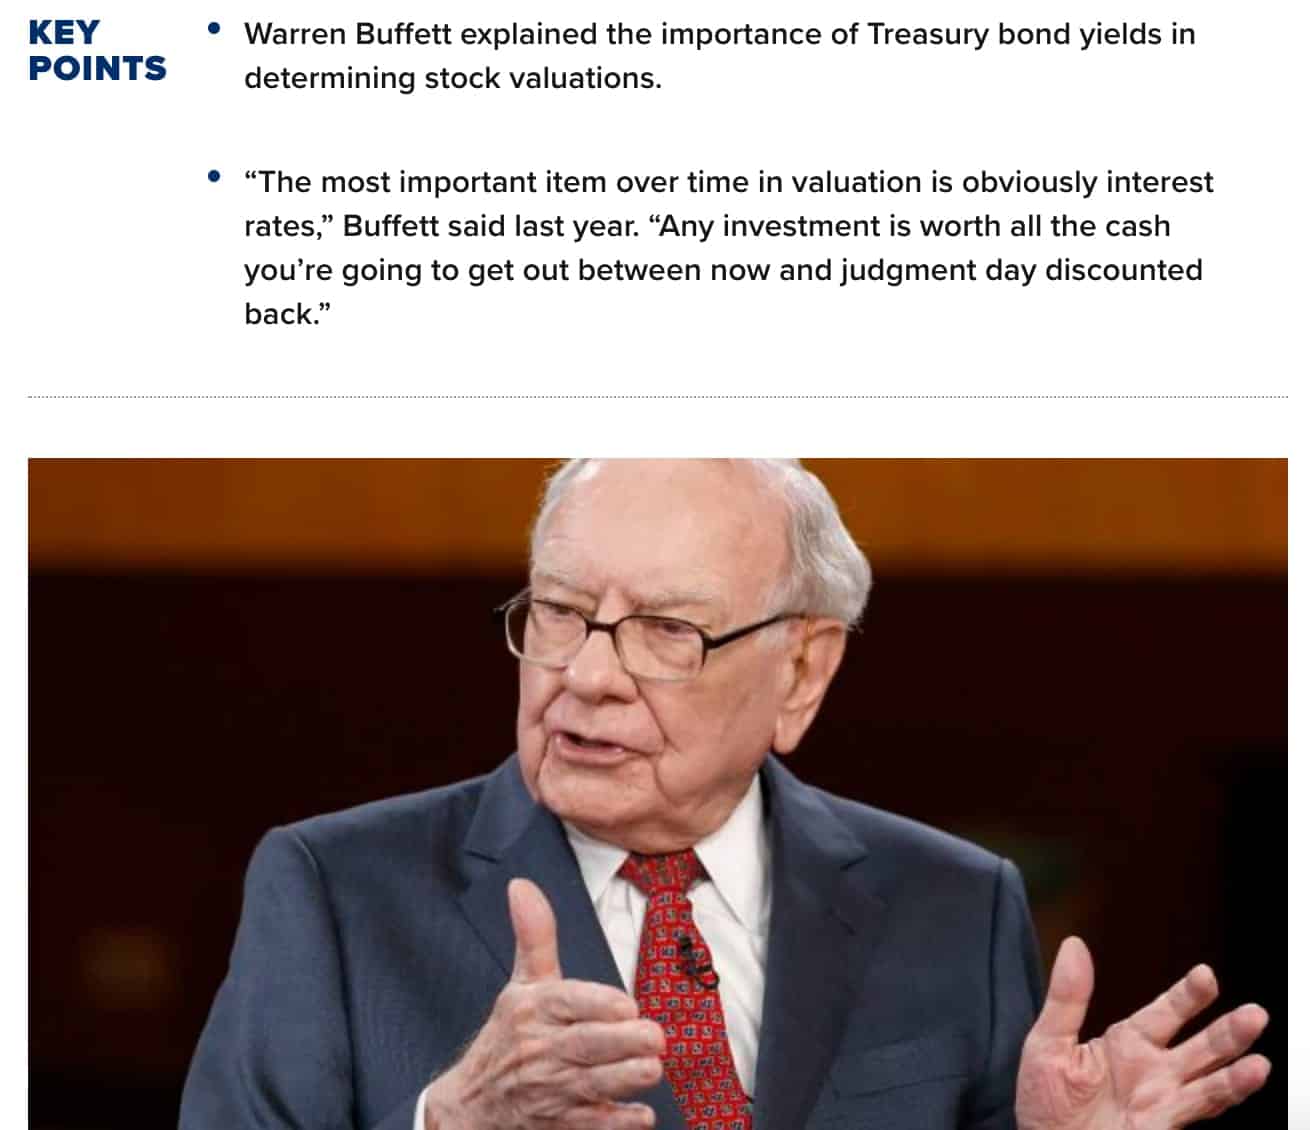 Warren Buffett explained the importance of the treasury bond yields in determining stock valuations